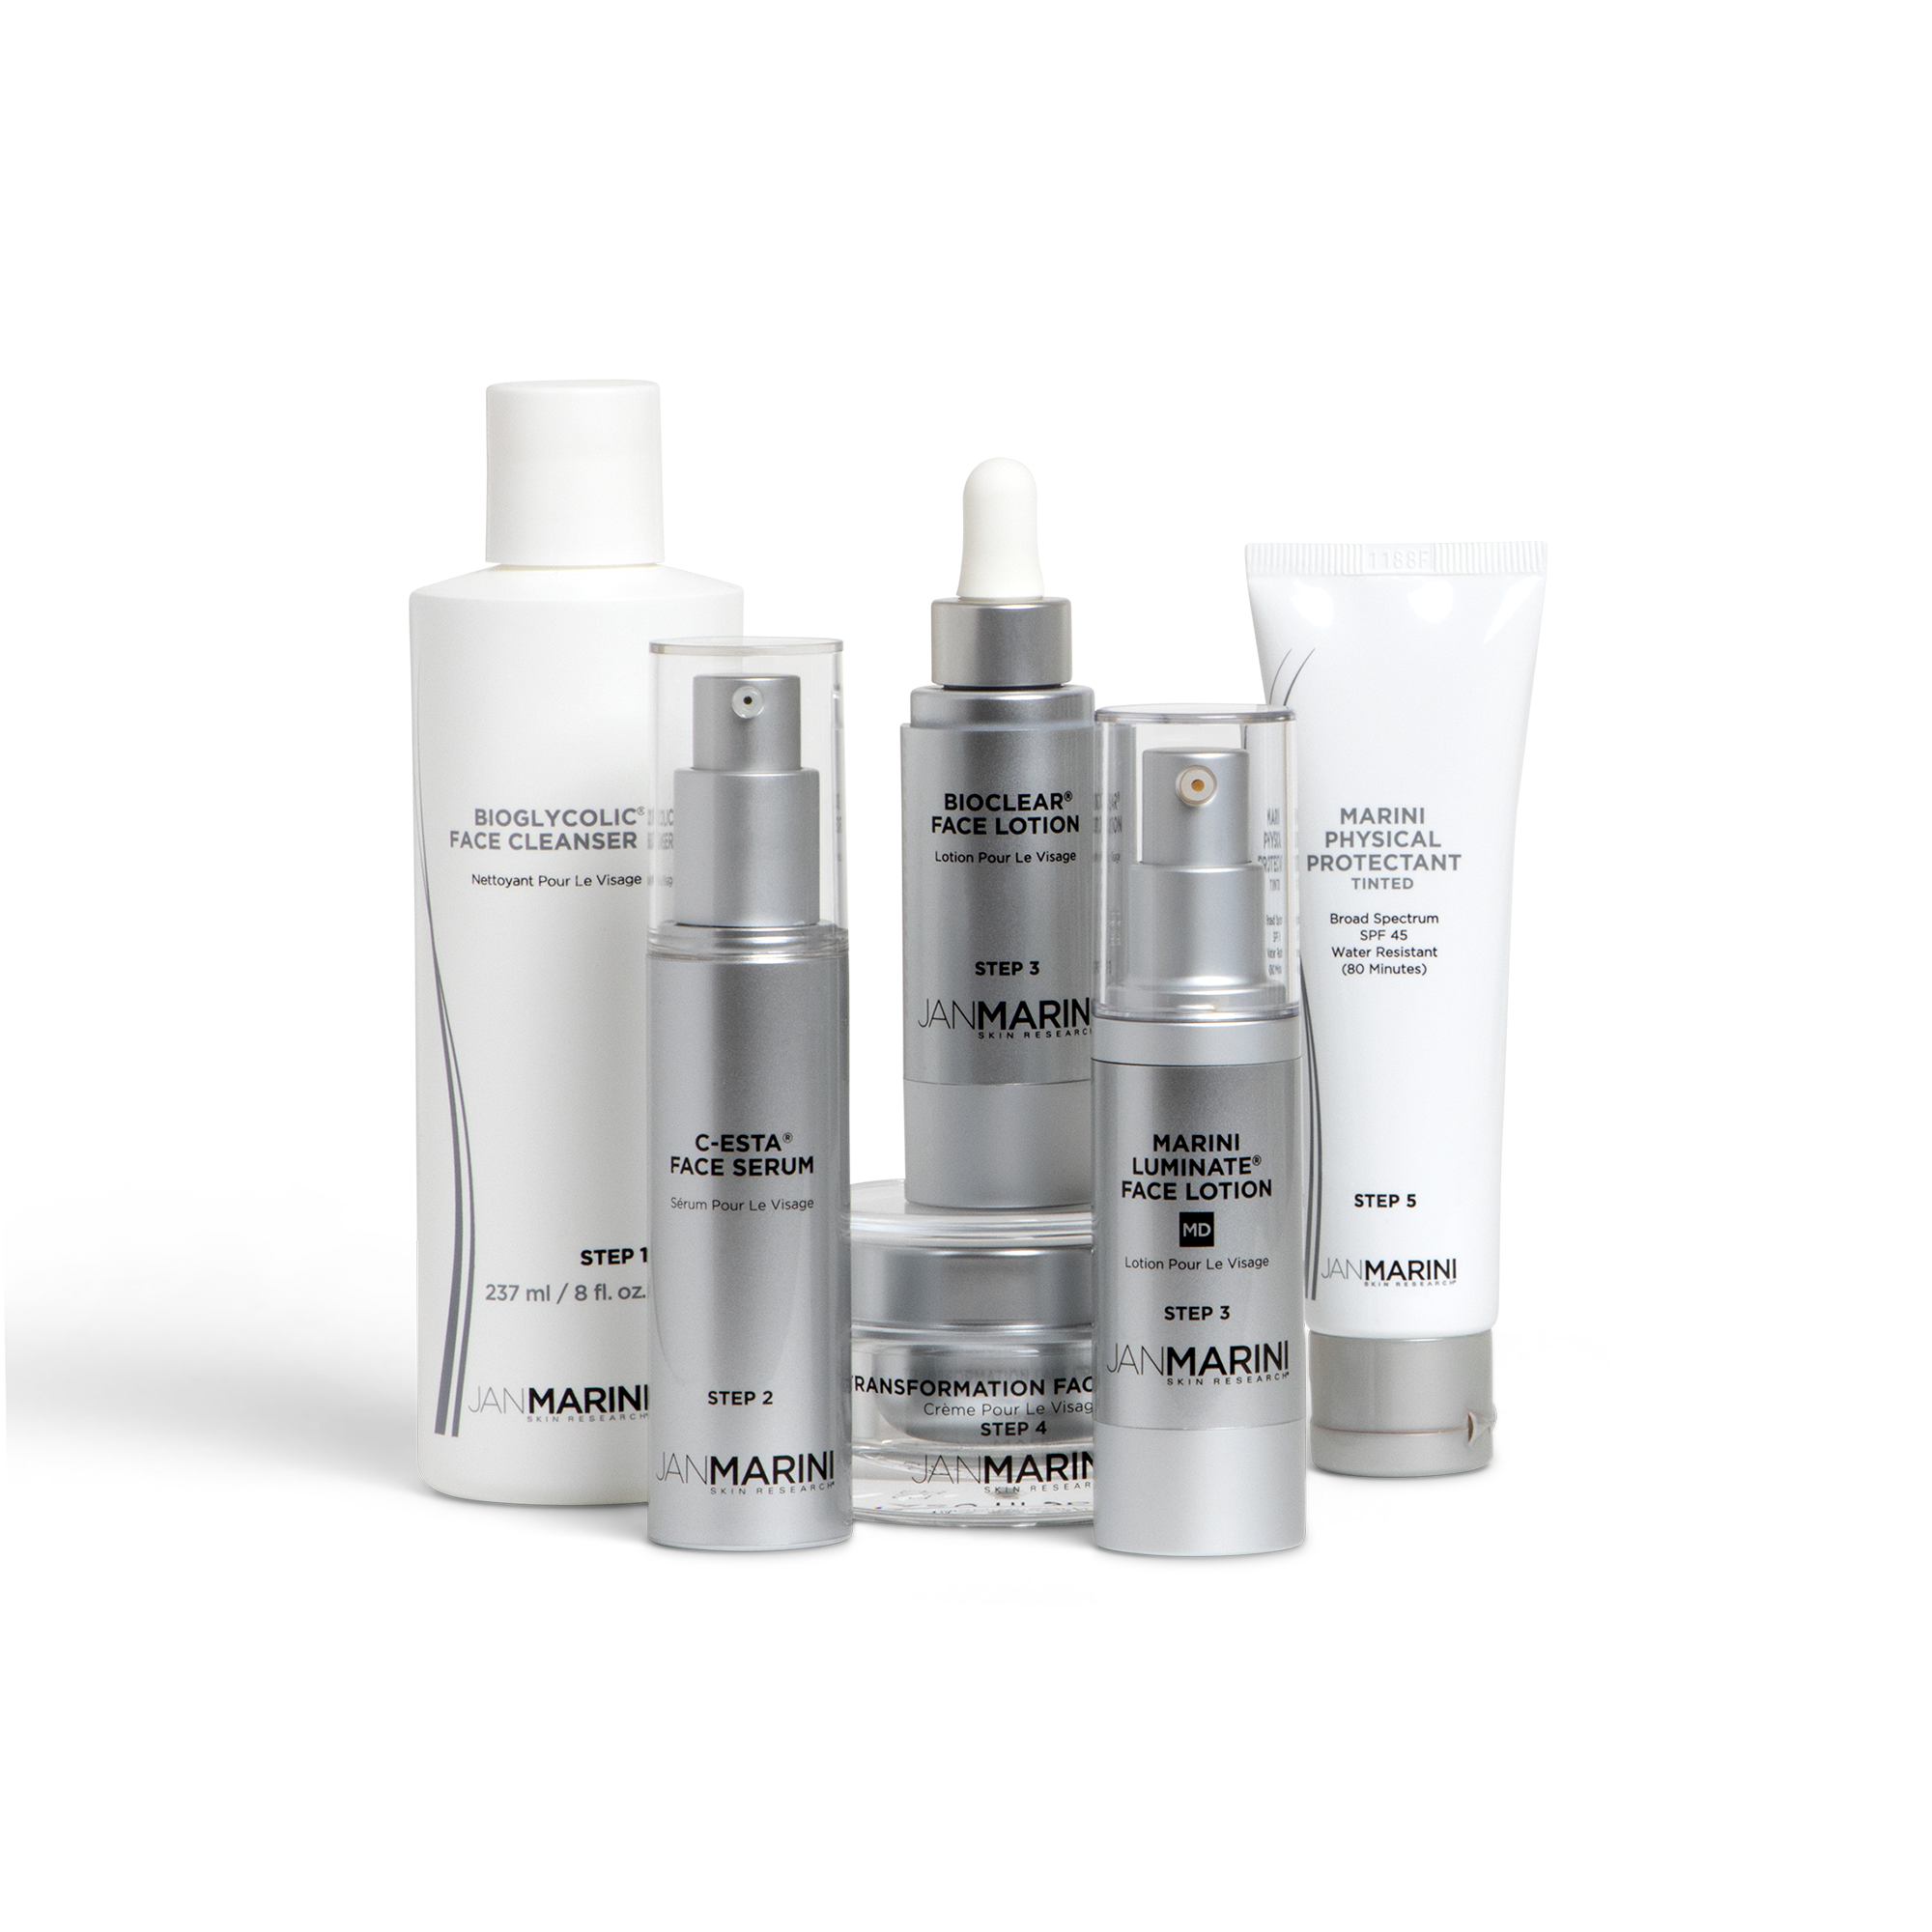 Jan Marini A Skin Care Management System - MD Normal/Combo with Marini Physical Protectant SPF 45 Tinted